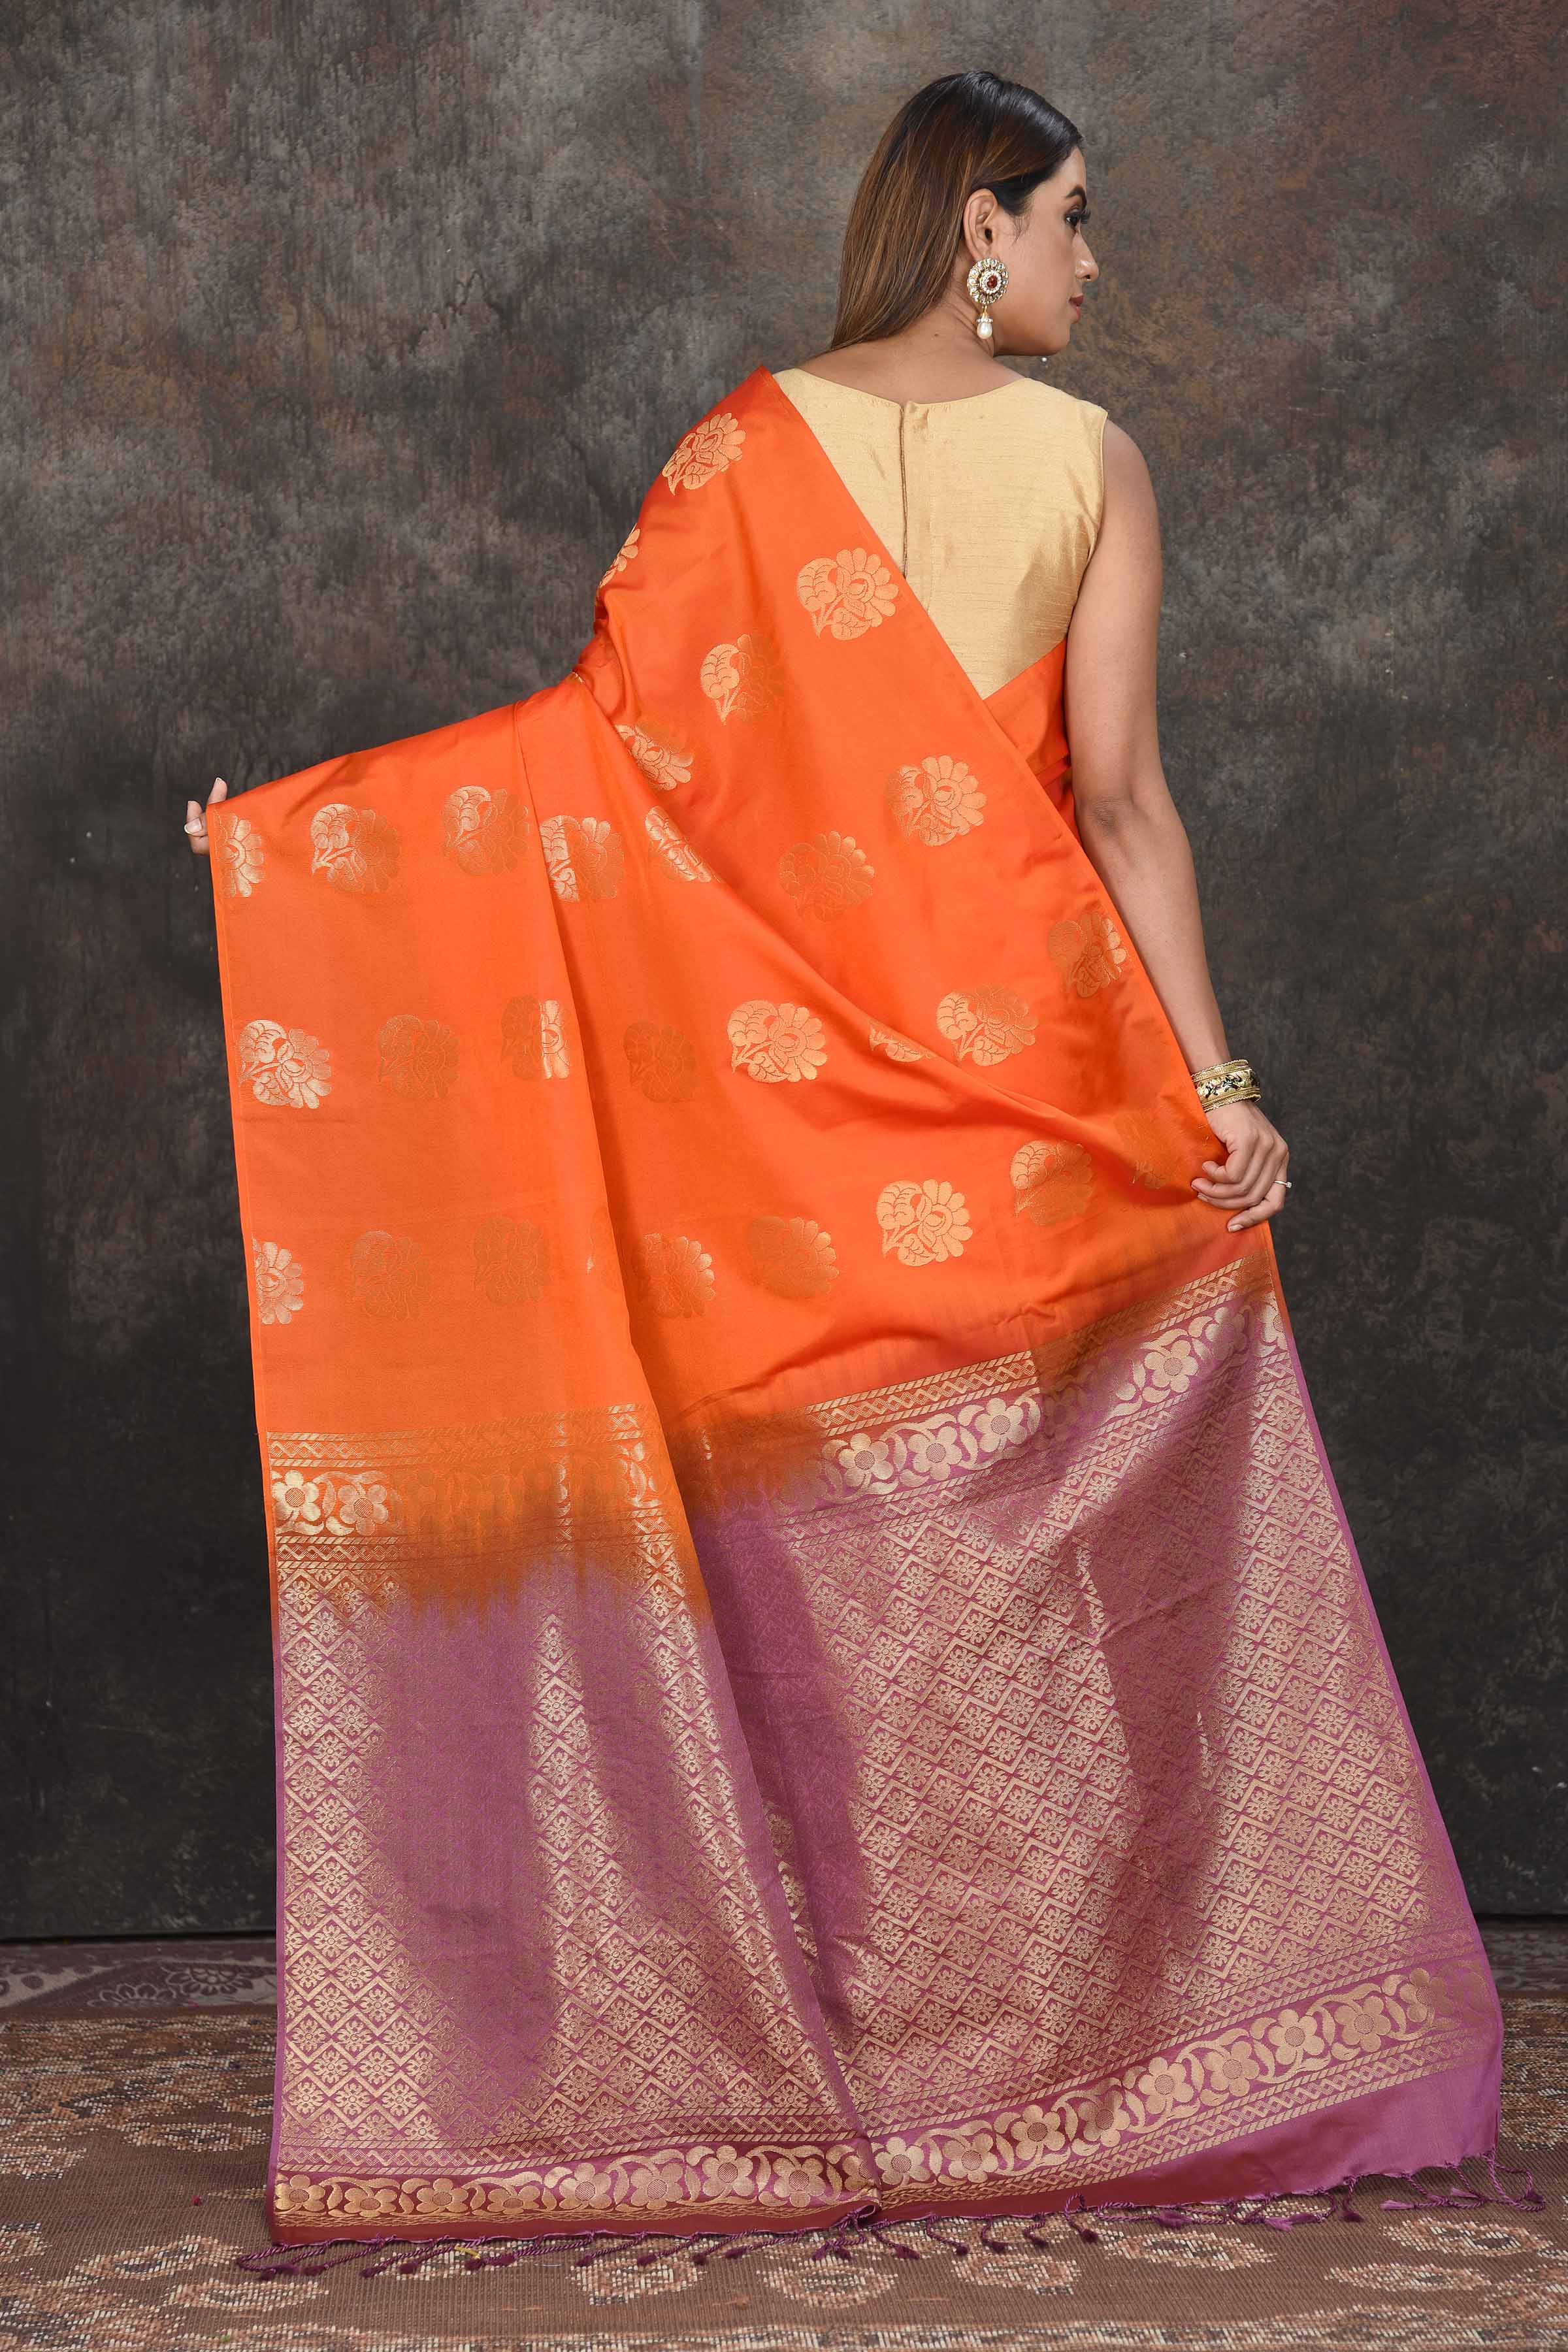 Buy stunning orange Kanjivaram soft silk sari online in USA with purple zari border. Be the center of attraction on special occasions in ethnic sarees, designer sarees, embroidered sarees, handwoven sarees, pure silk sarees from Pure Elegance Indian saree store in USA.-back